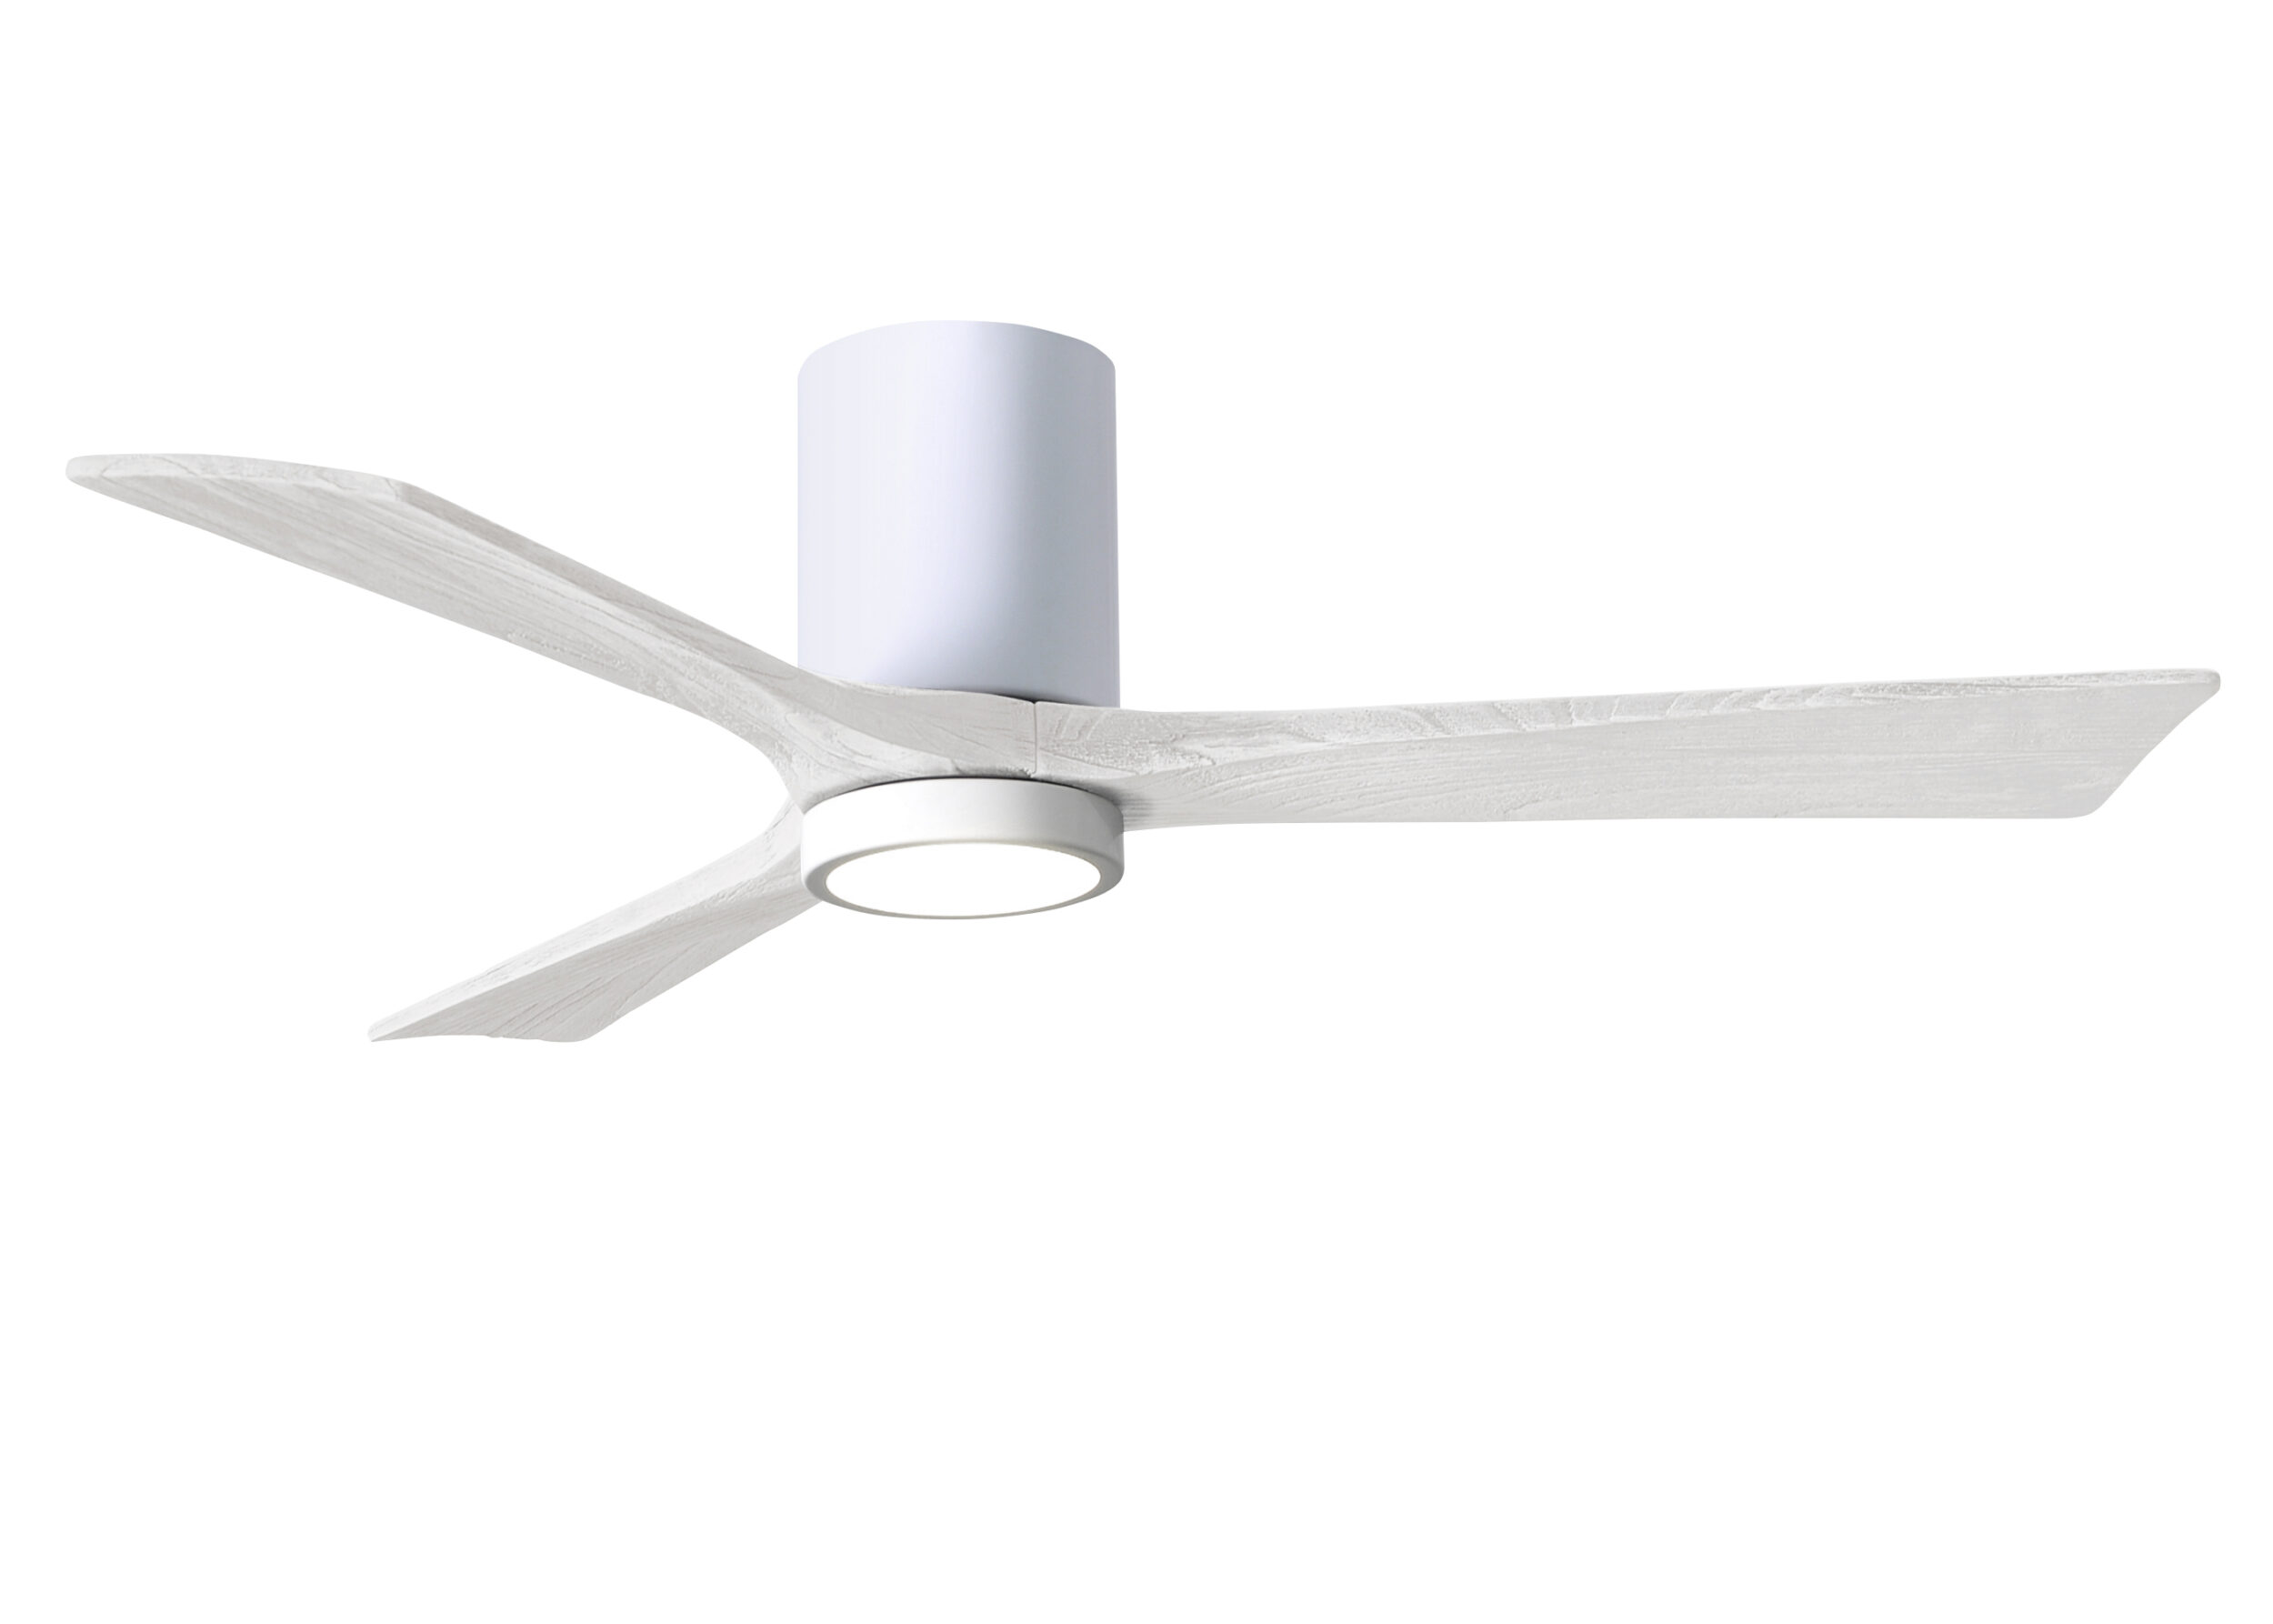 Irene-3HLK Ceiling Fan in Gloss White Finish with 52